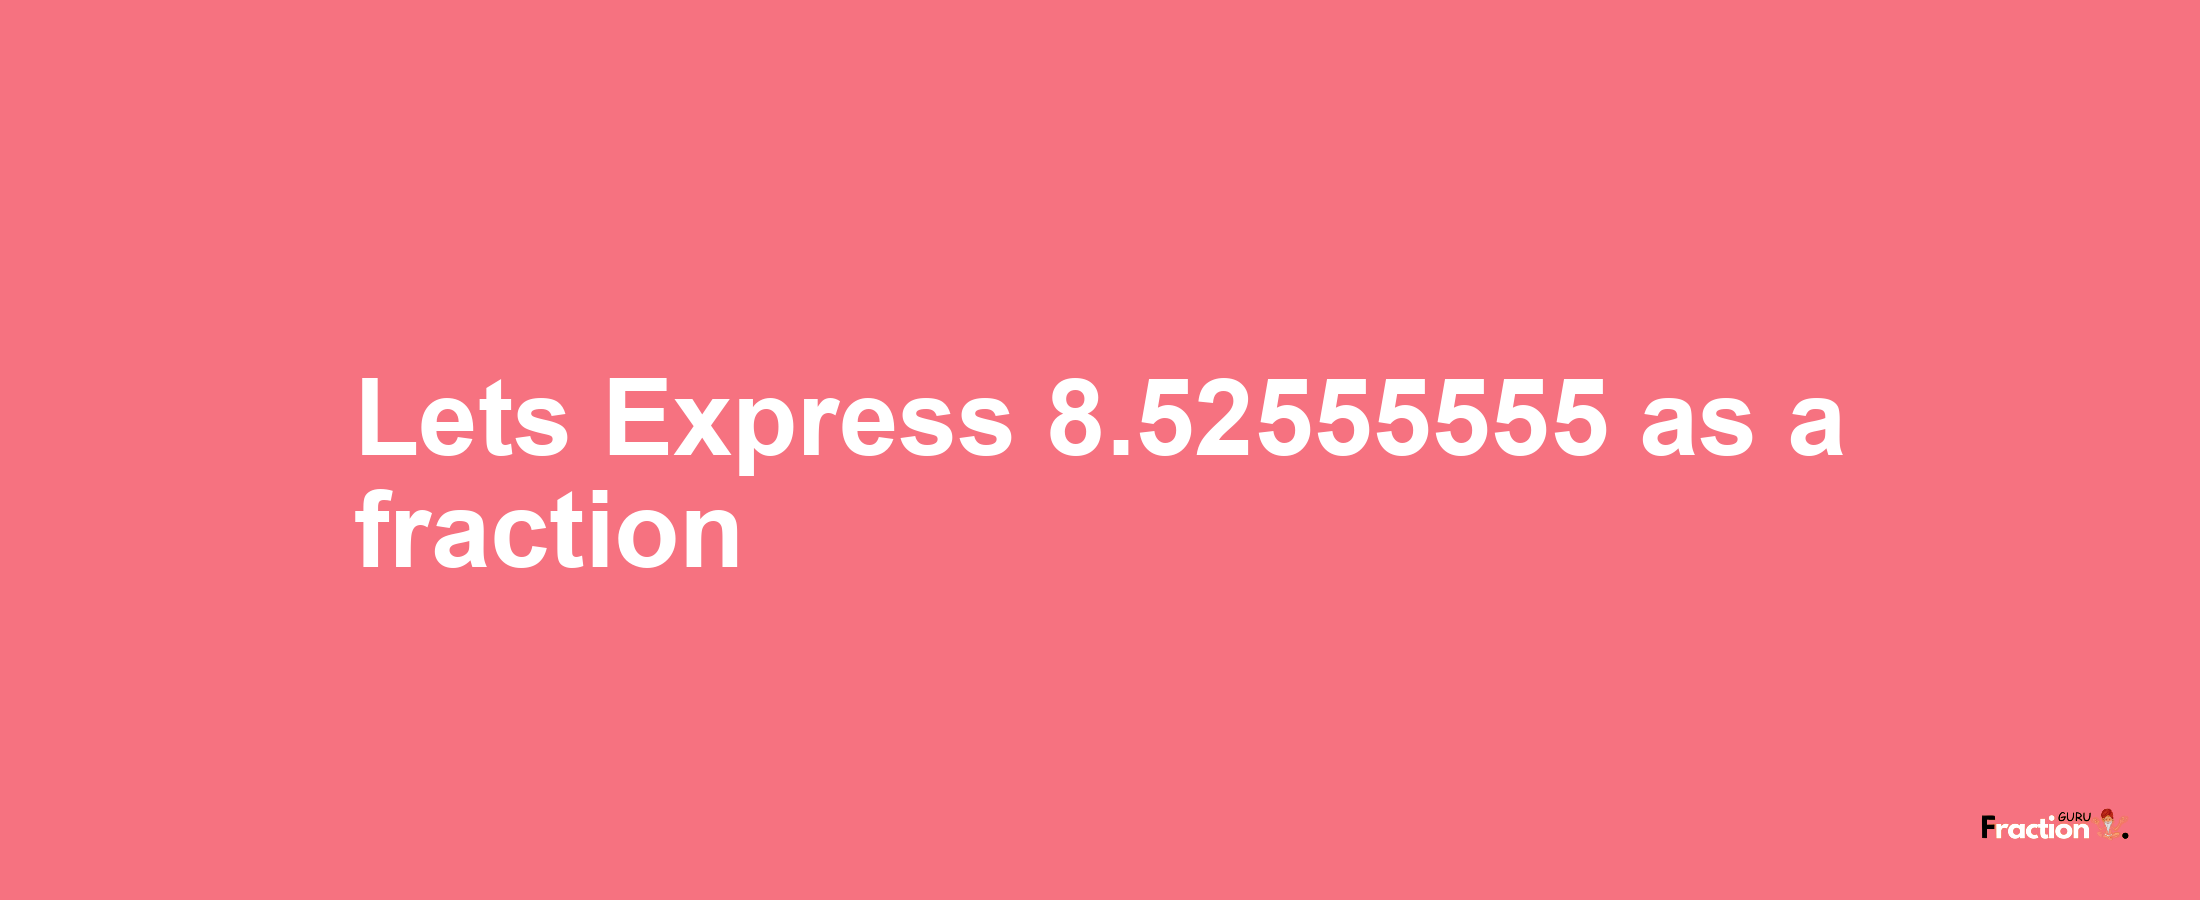 Lets Express 8.52555555 as afraction